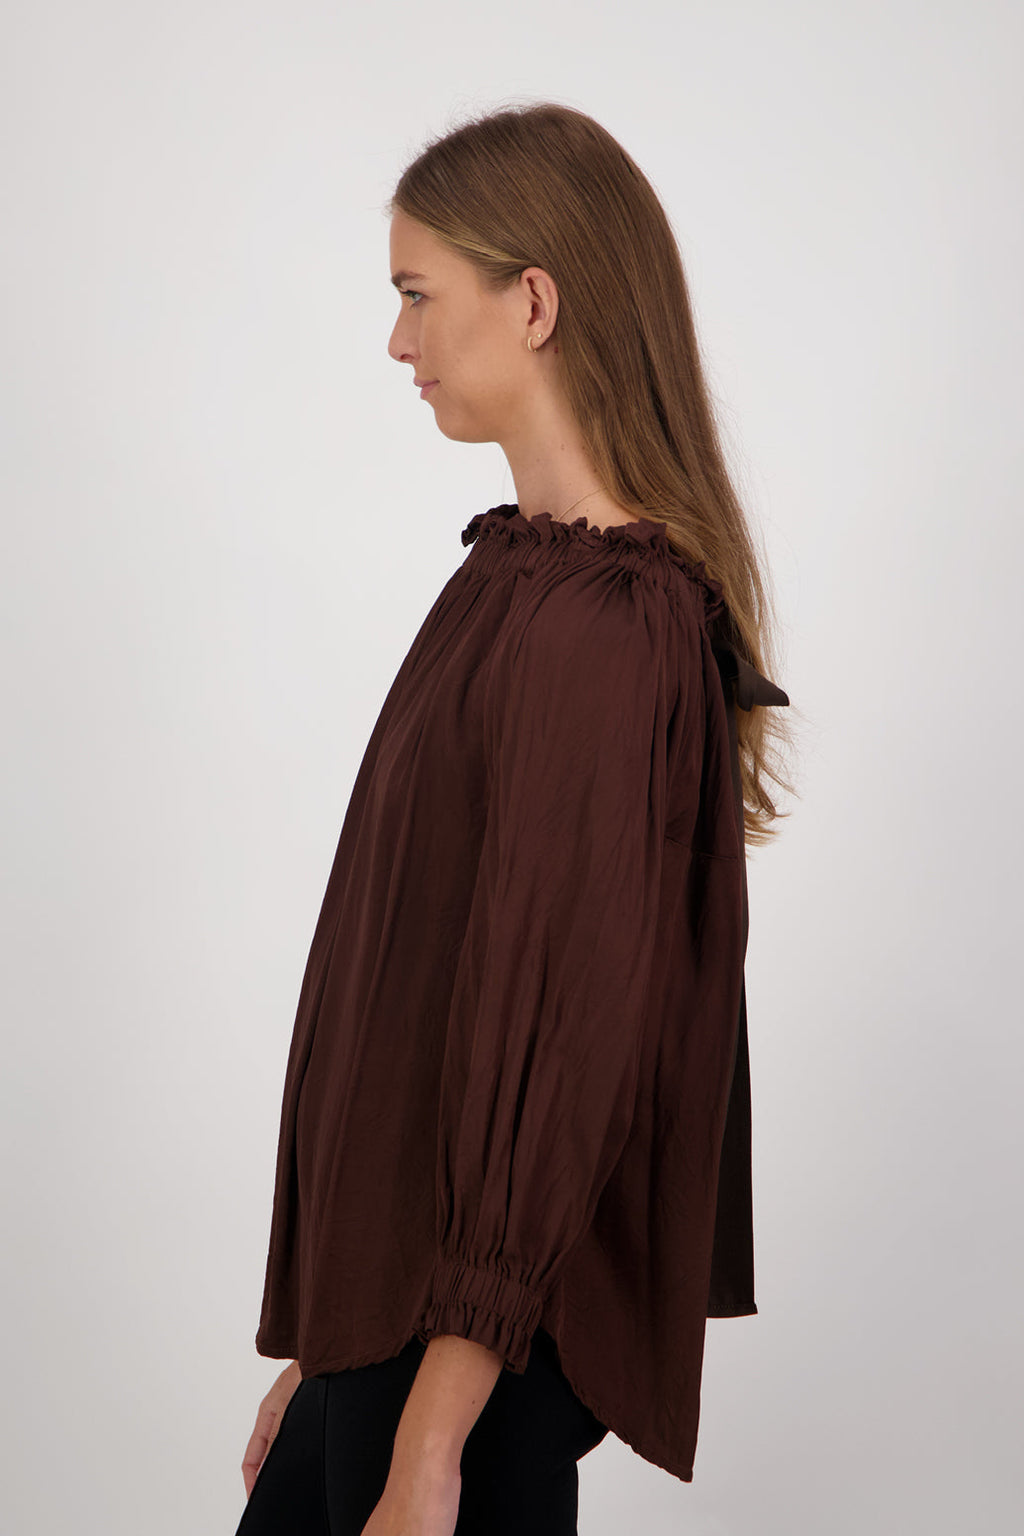 BRIARWOOD ANNABELLE TOP-CHOCOLATE